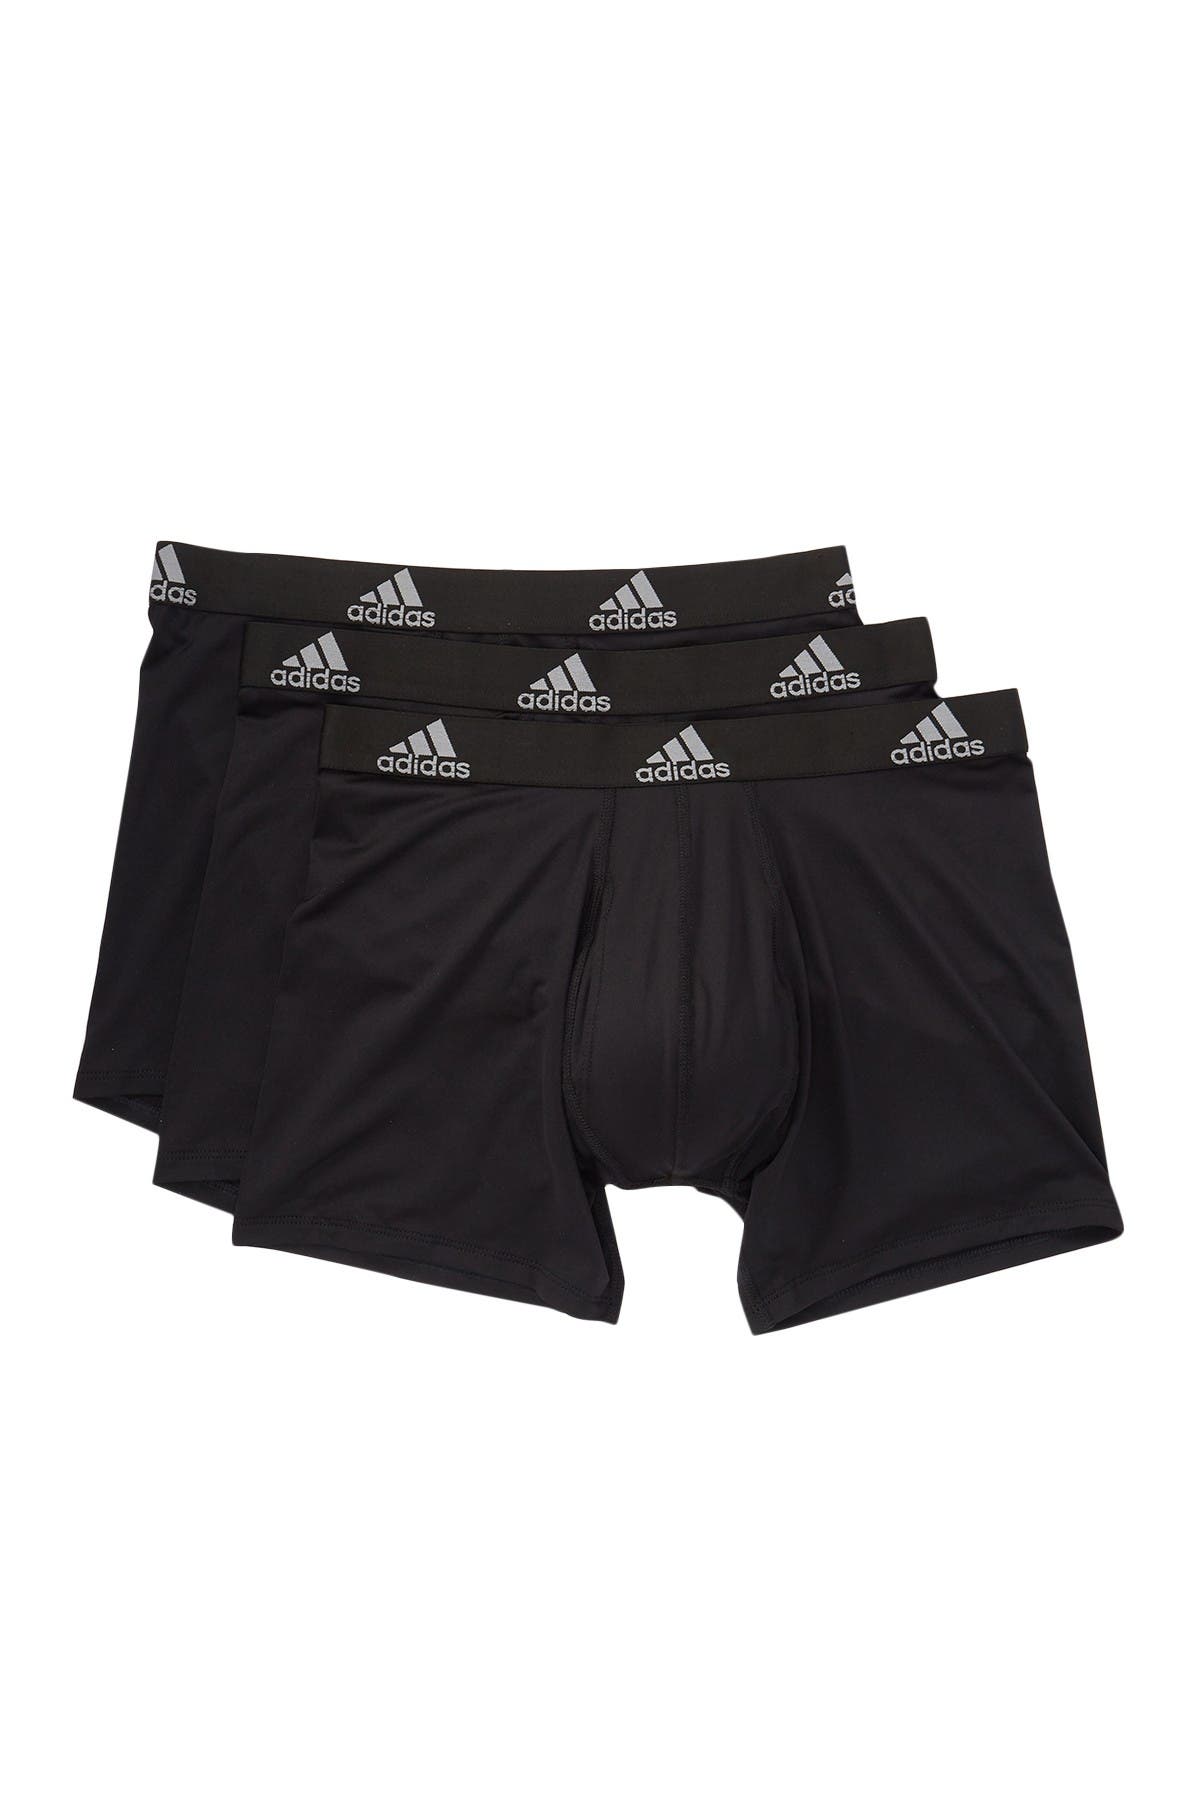 adidas climalite boxer briefs 3 pack